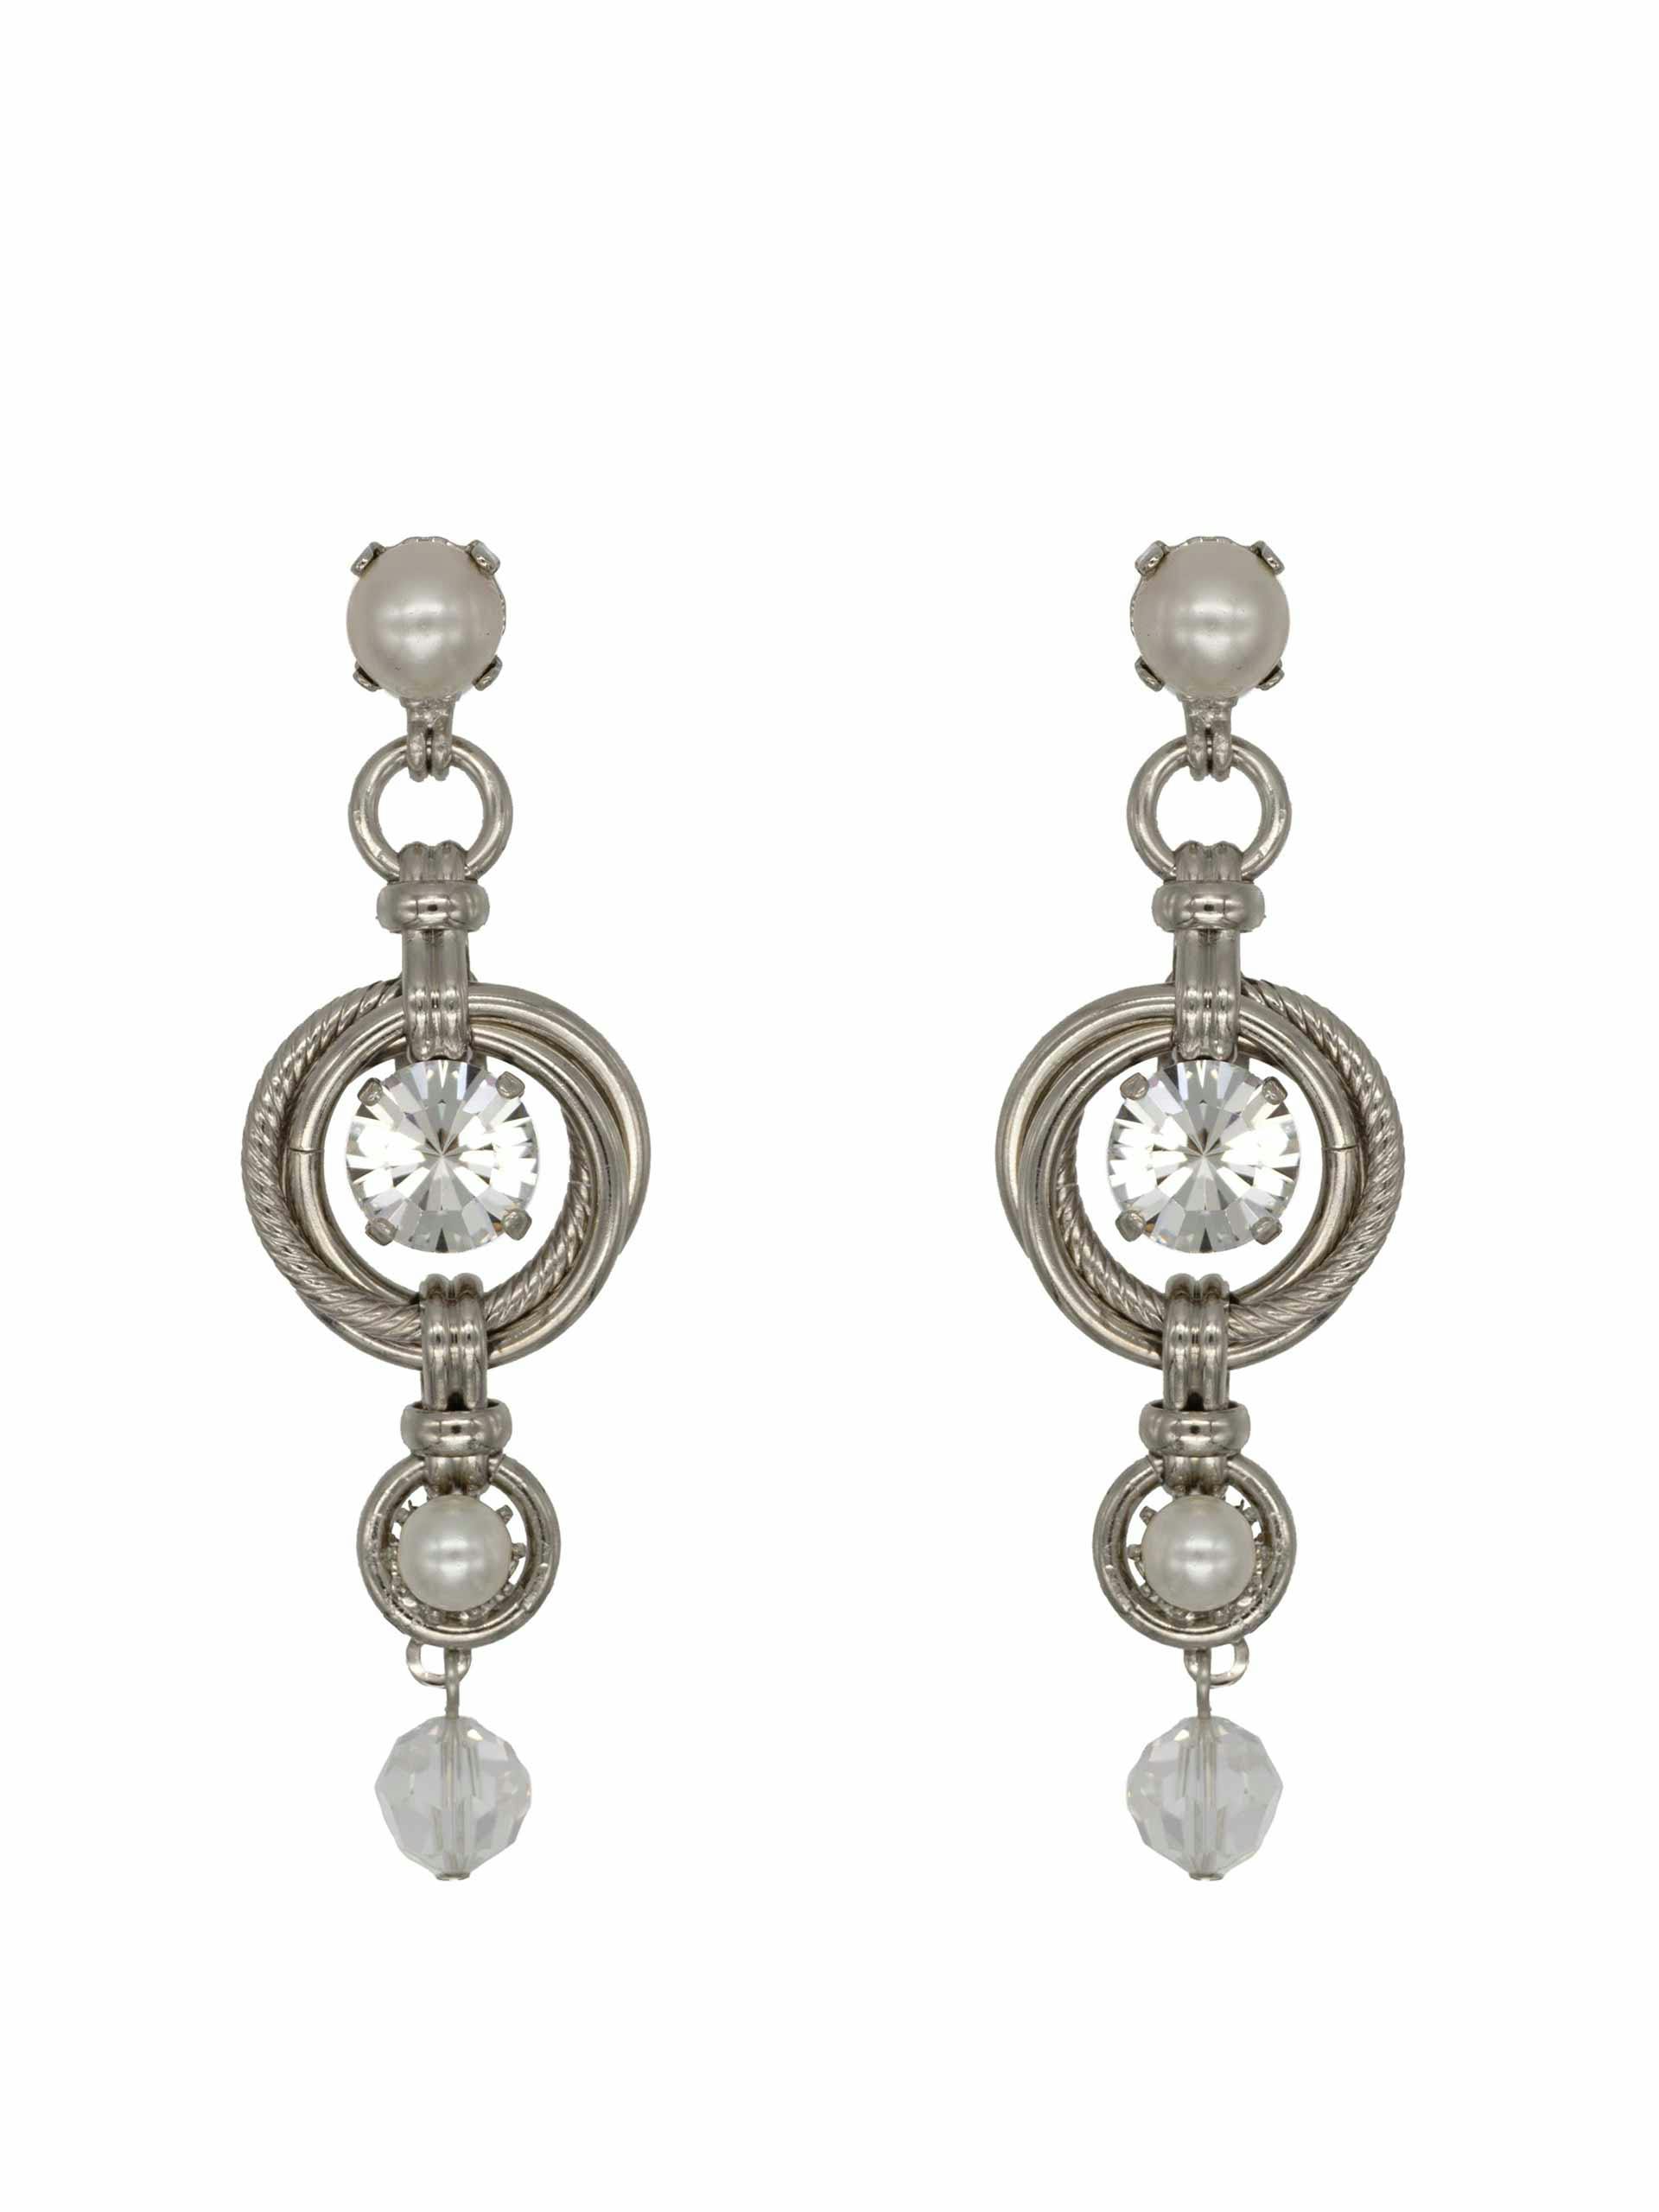 Knot earrings with pearls